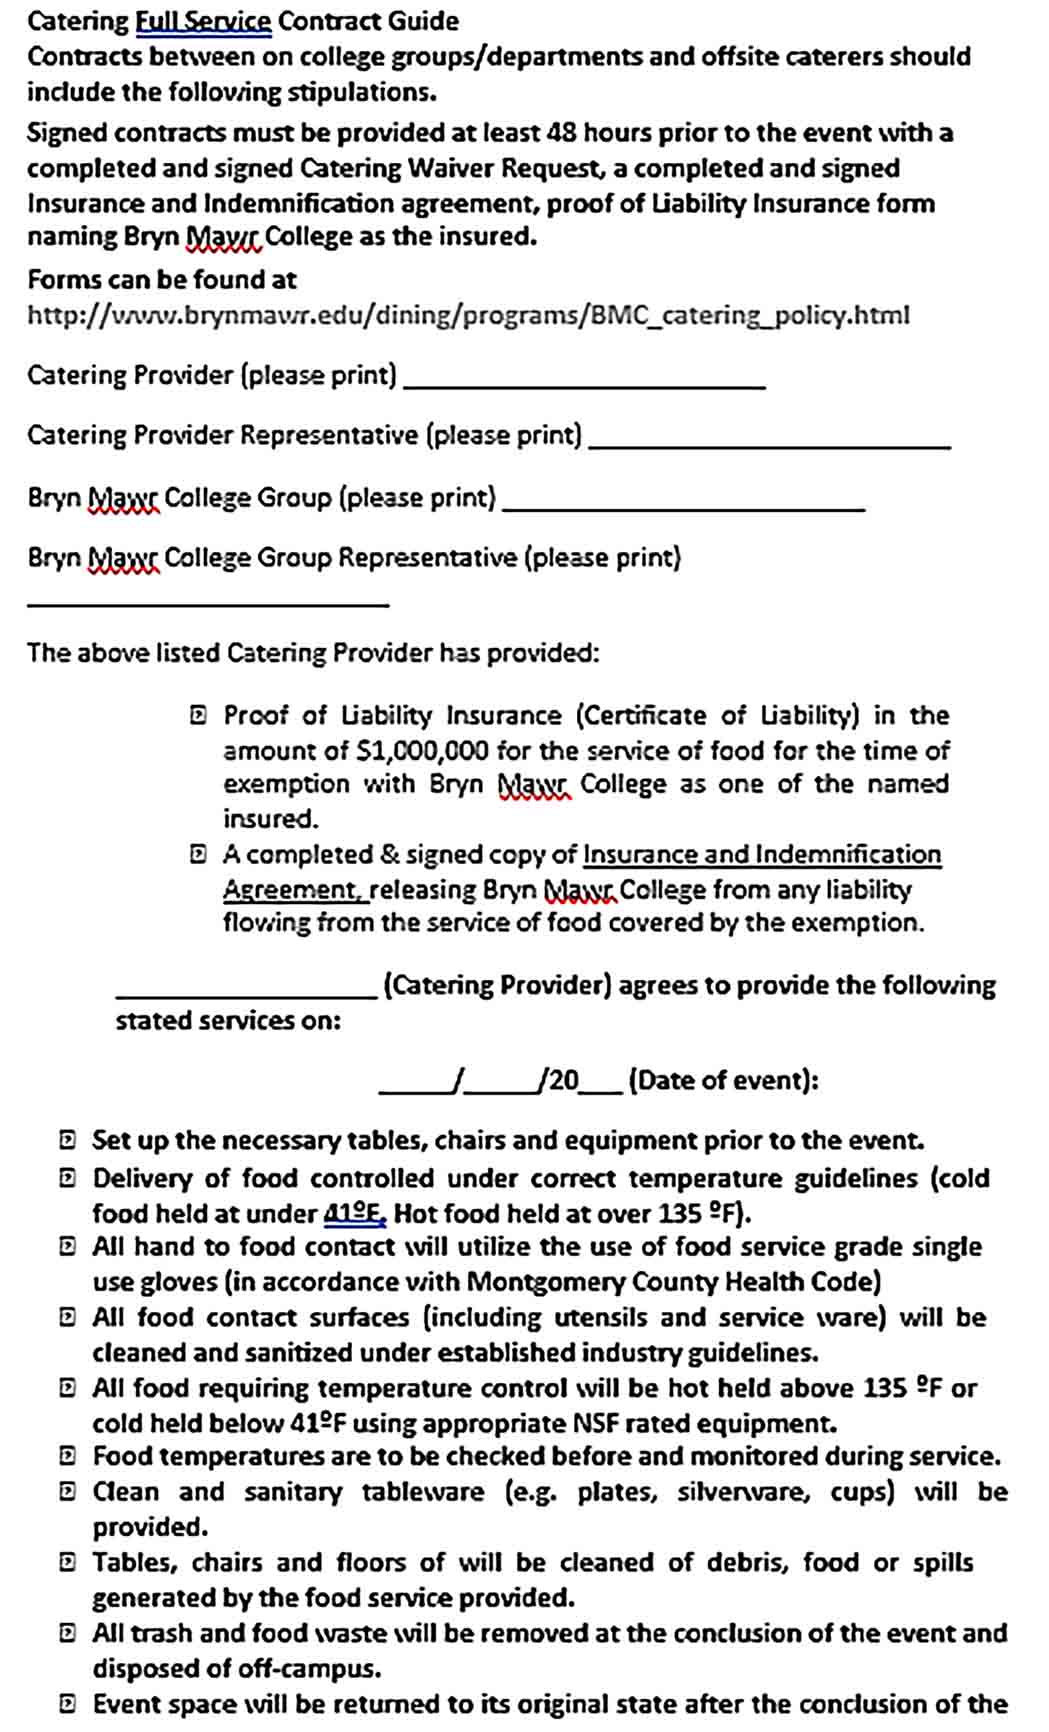 Sample Catering Service Contract Agreement